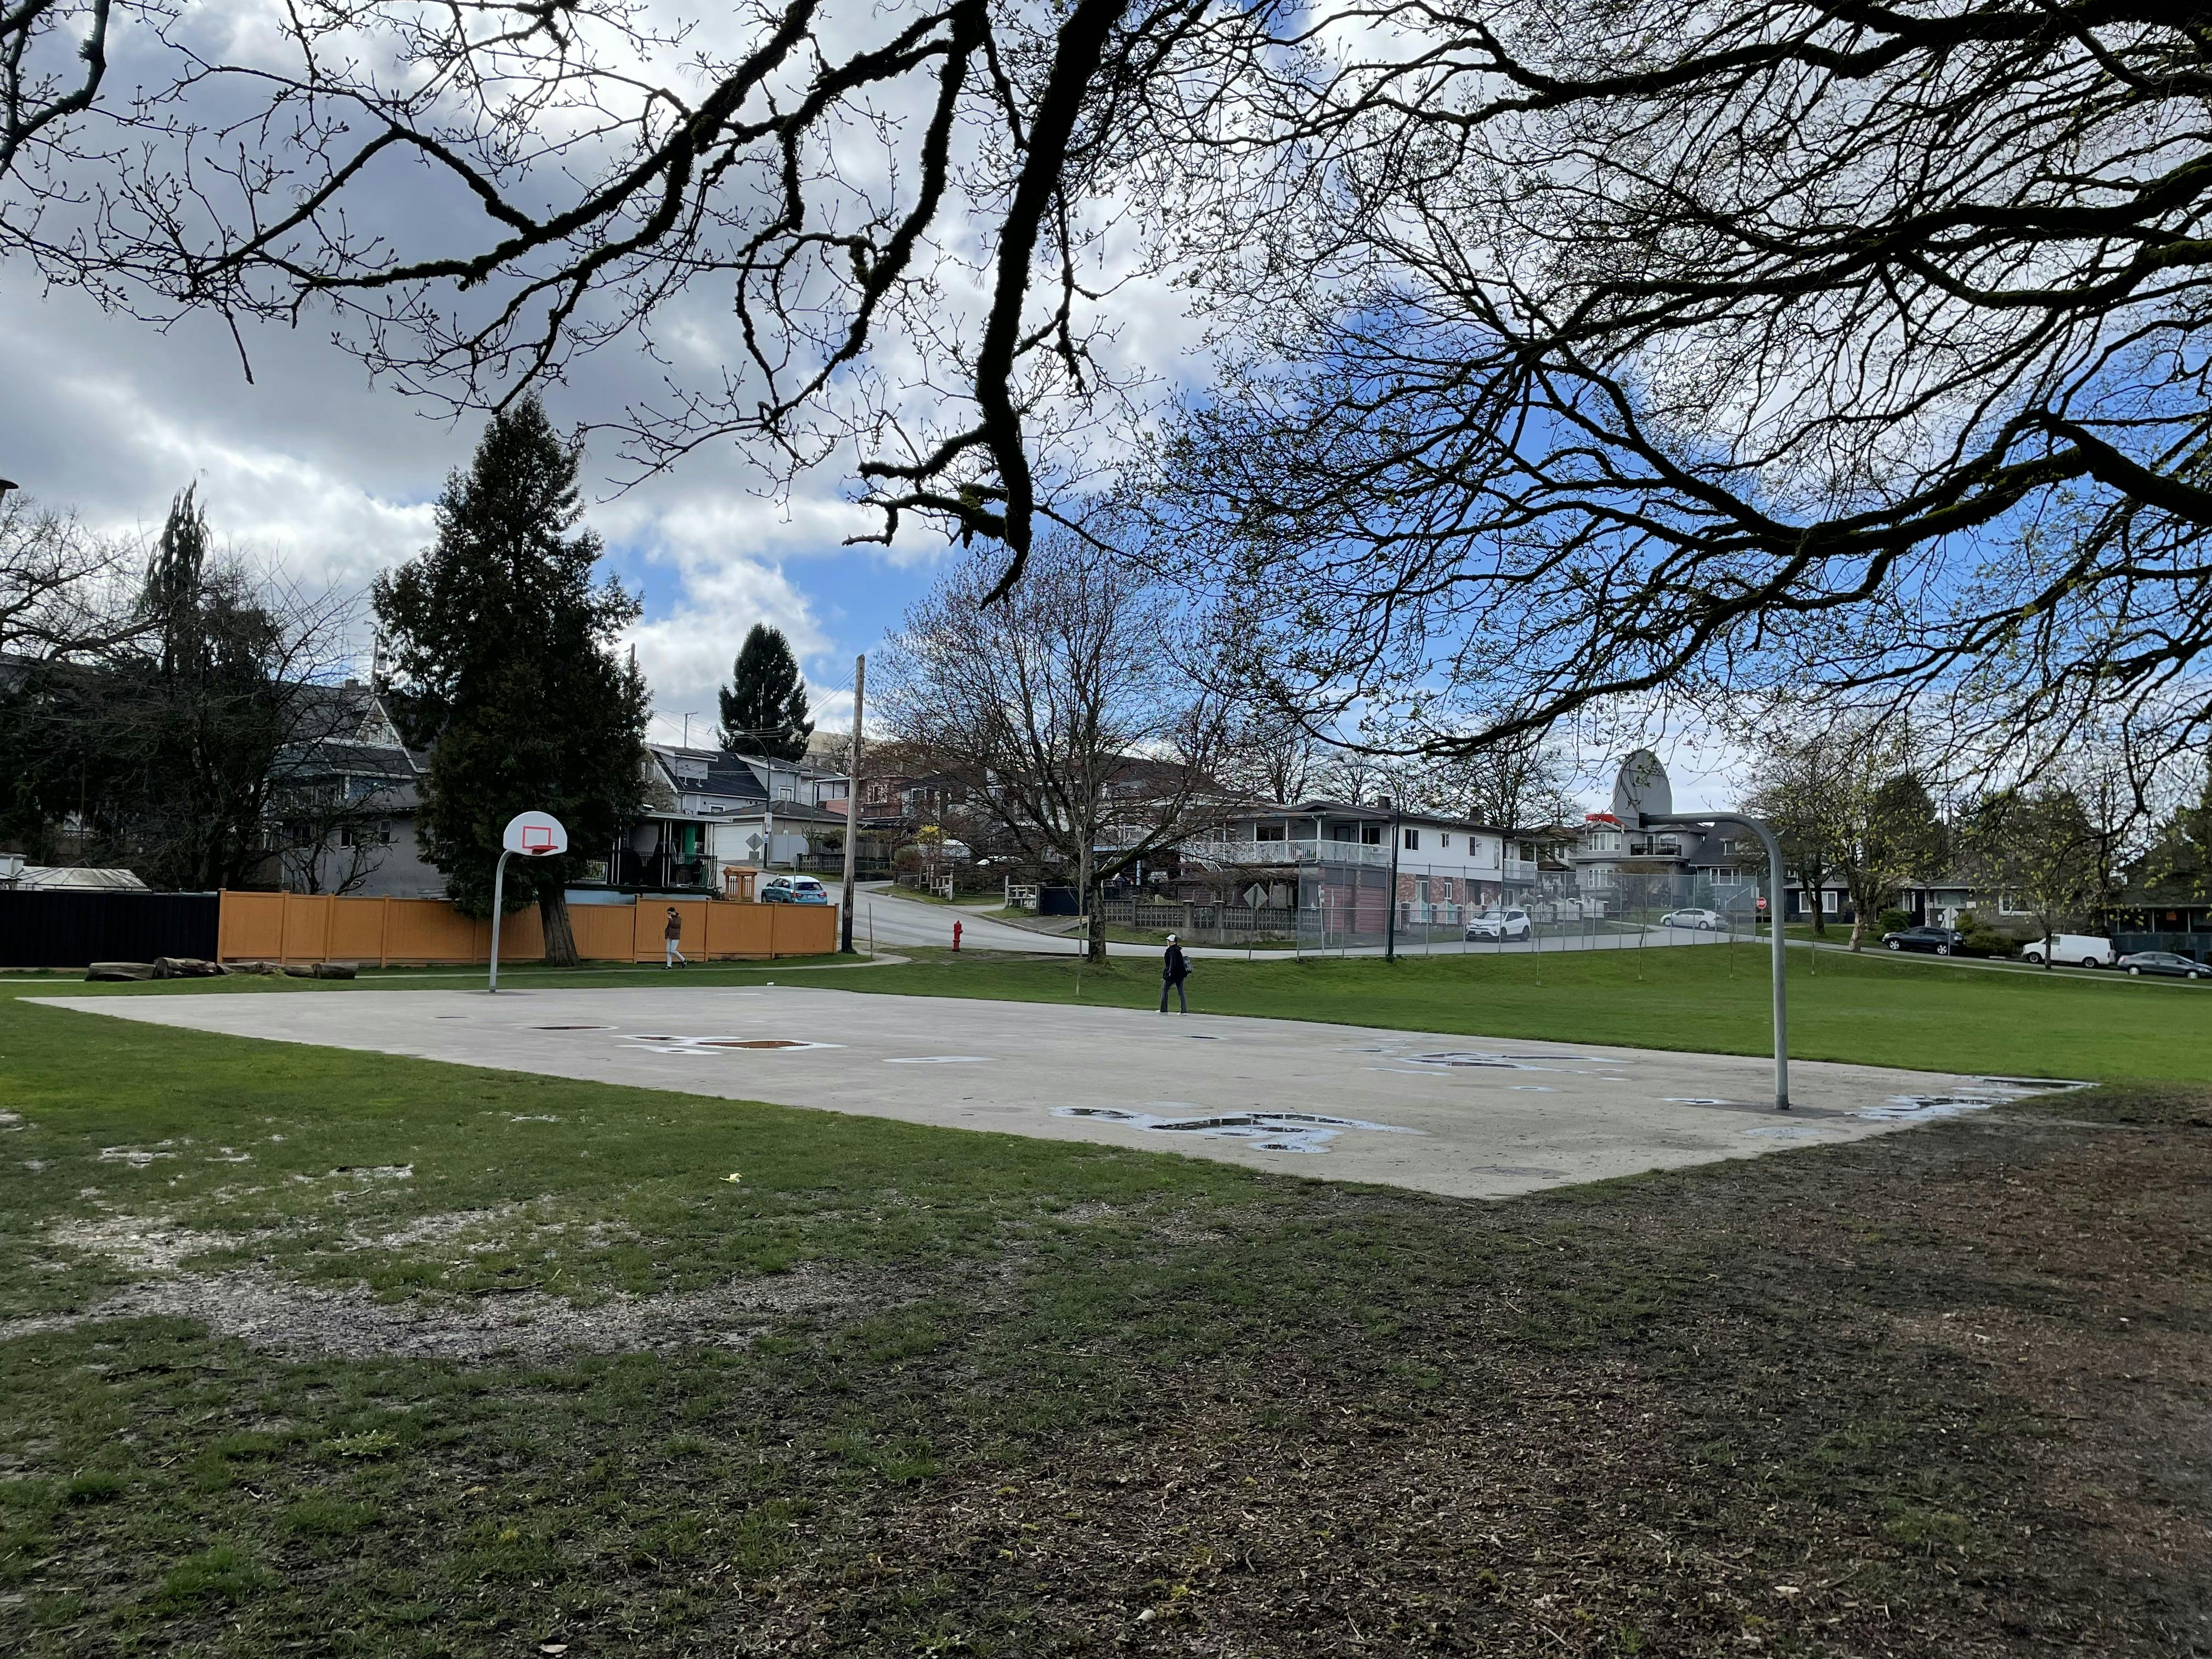 Collingwood Park - existing basketball condition